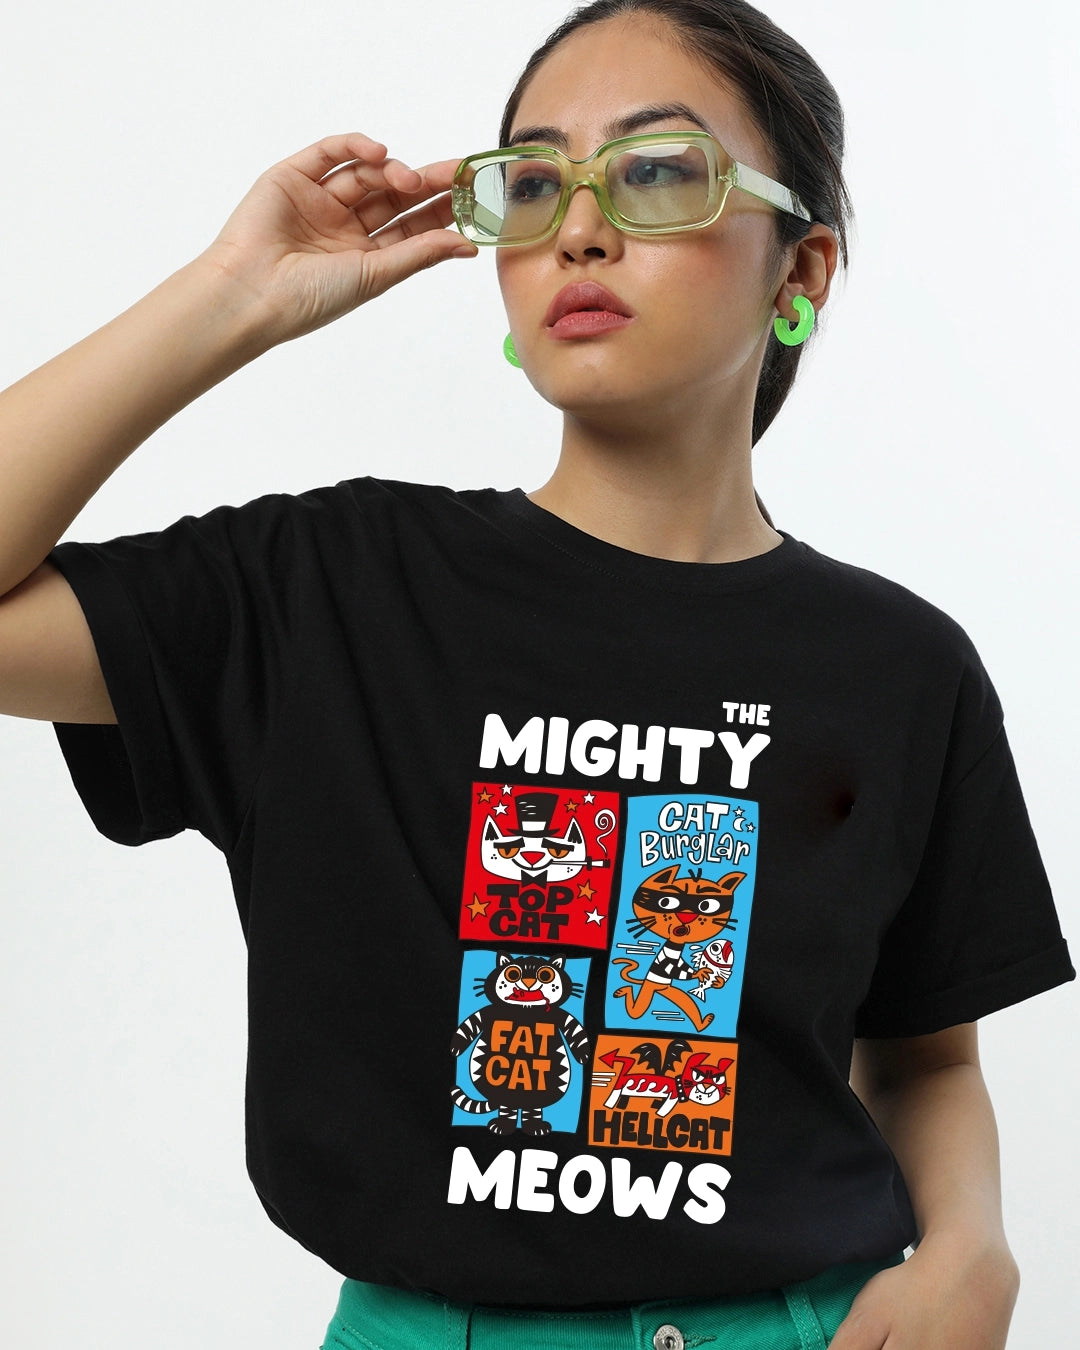 Women's Black The Mighty Meows Graphic Printed Boyfriend T-shirt